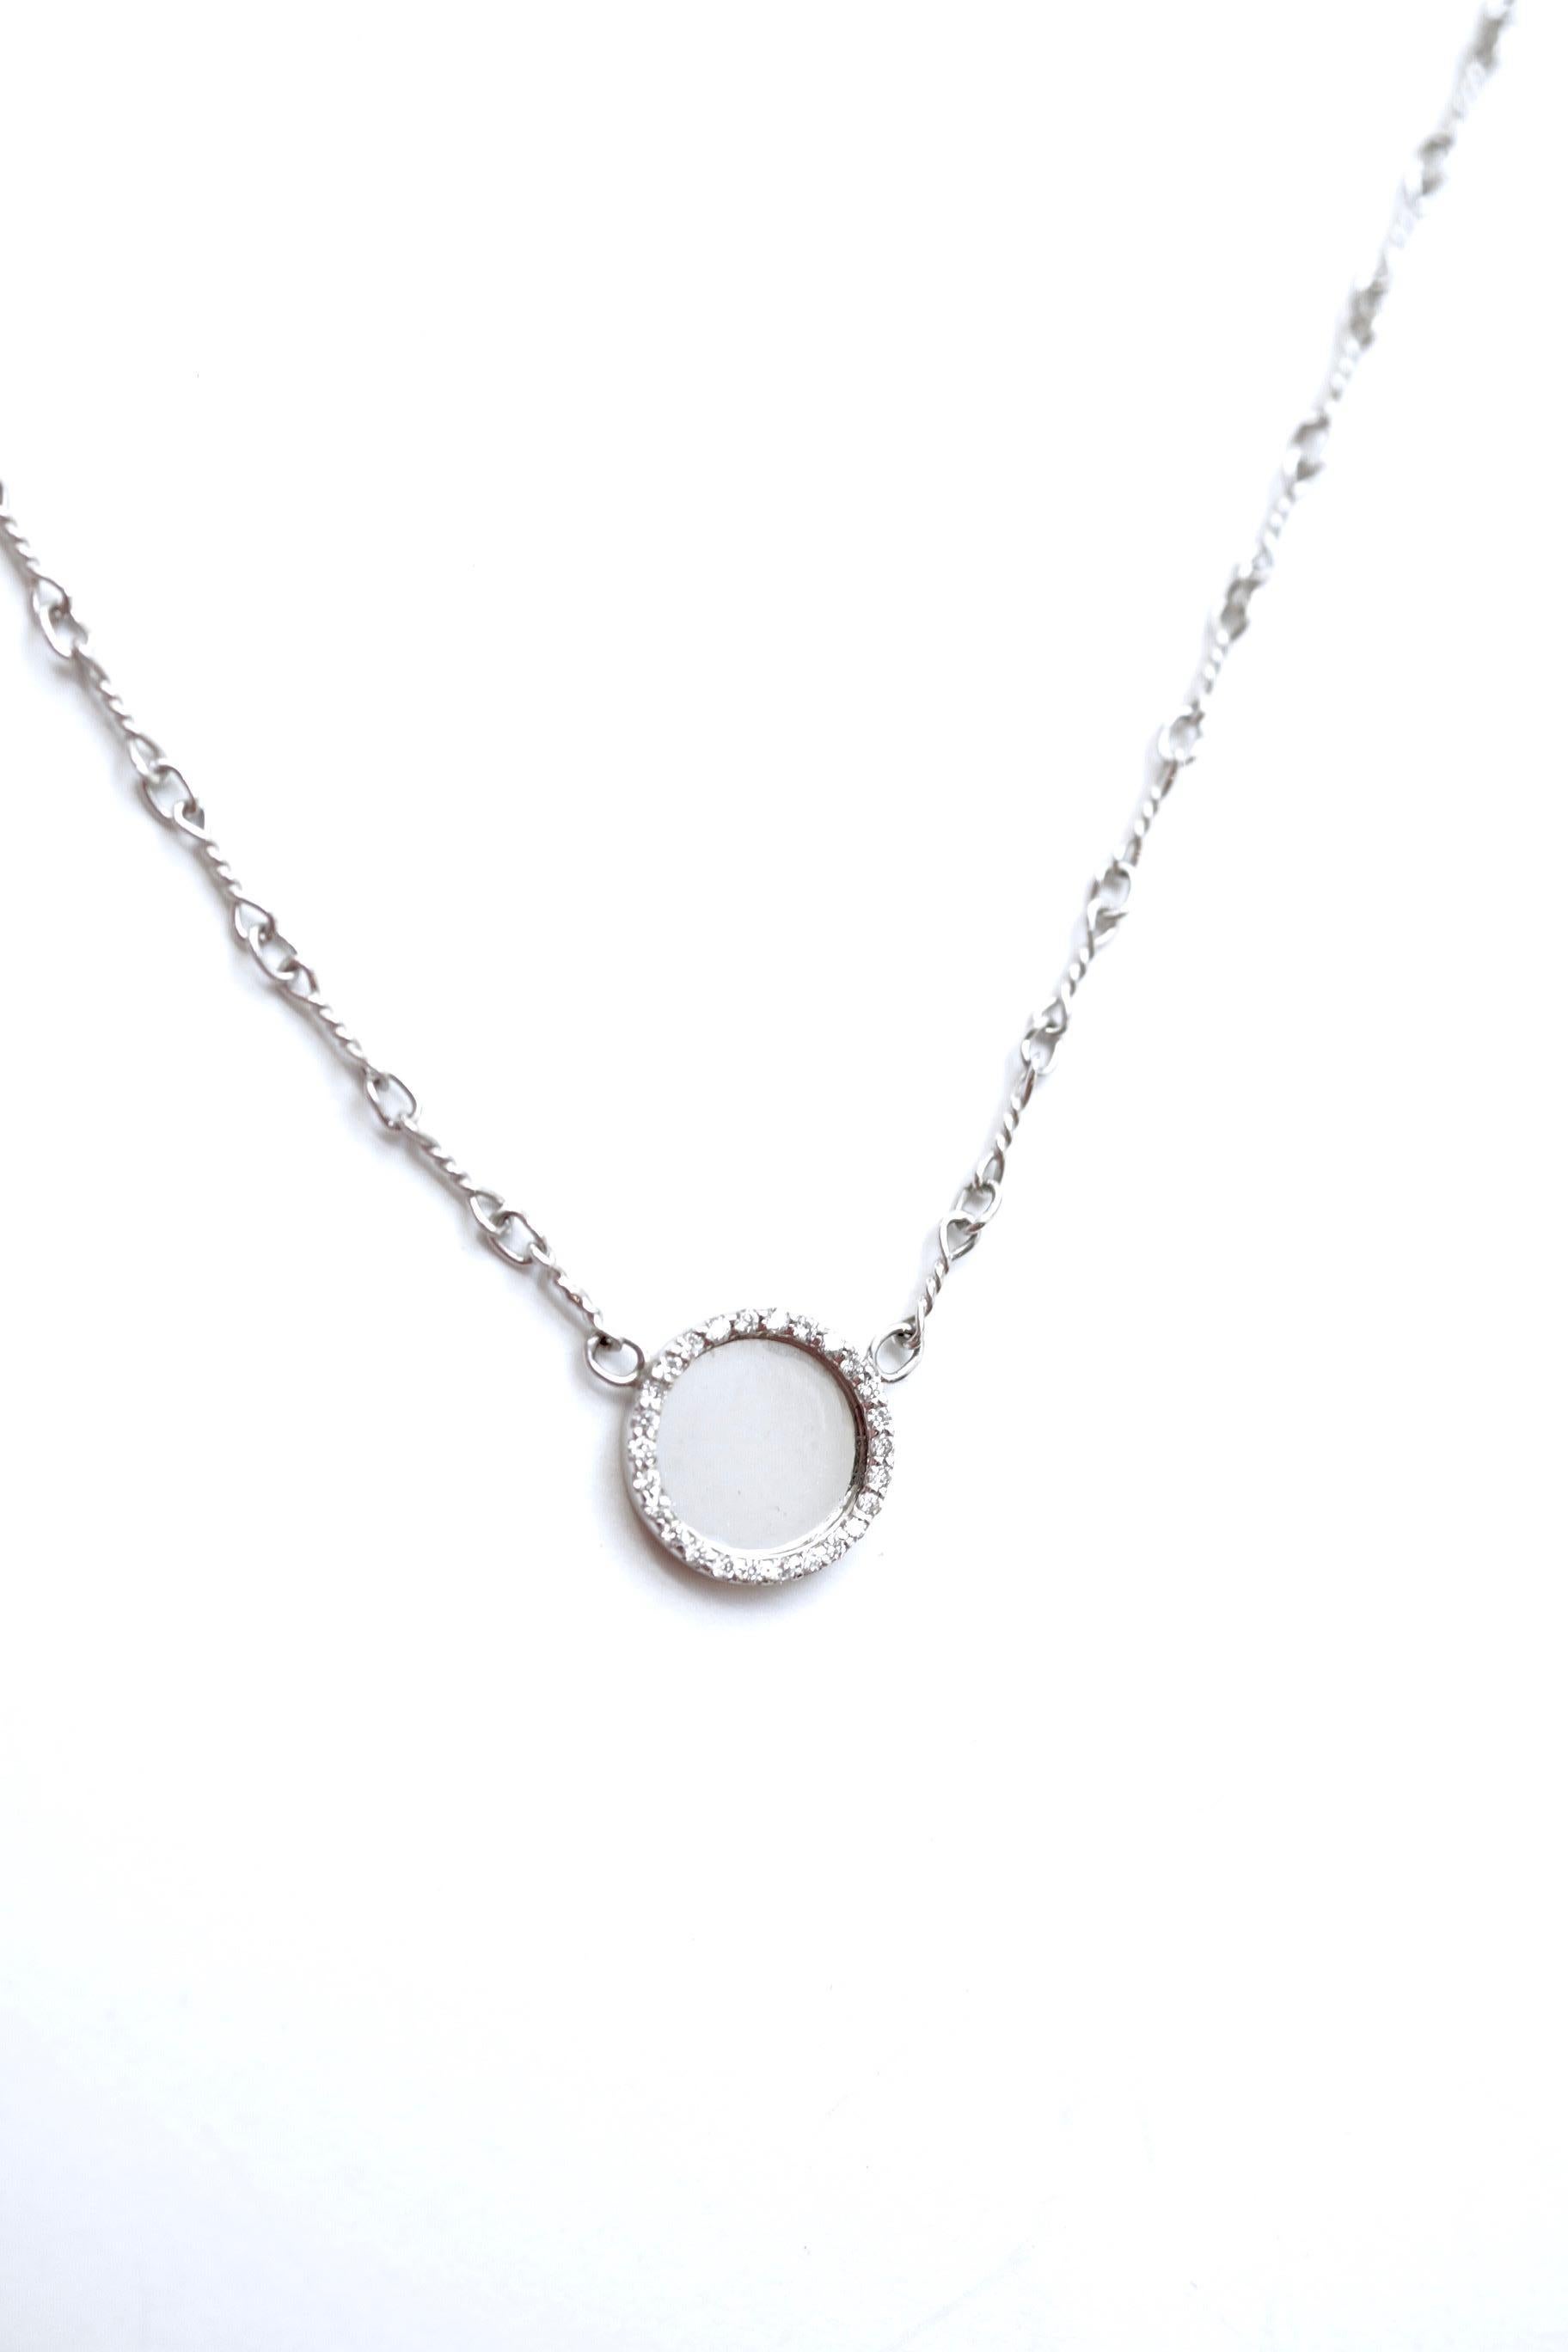 Murree Dot Necklace 
A 15-inch eighteen-karat white gold chain suspending a 10mm circular pendant, framed with a collection of white diamonds.  Filling the center of this necklace, is a very fine and highly polished piece of eighteen-karat white